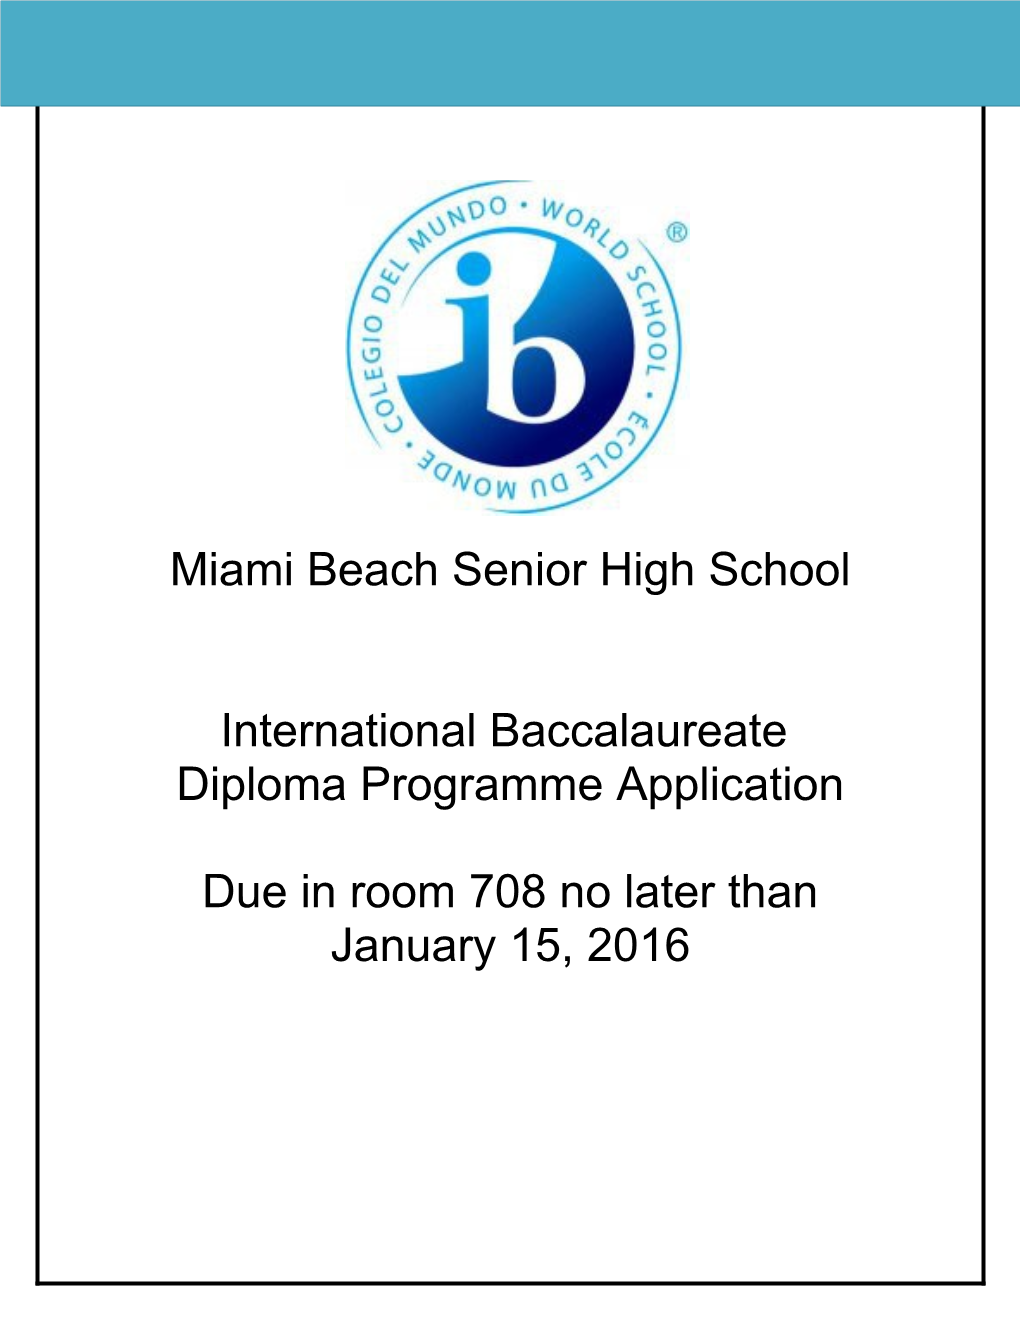 Thank You for Your Interest in the International Baccalaureate Diploma Program at Miami